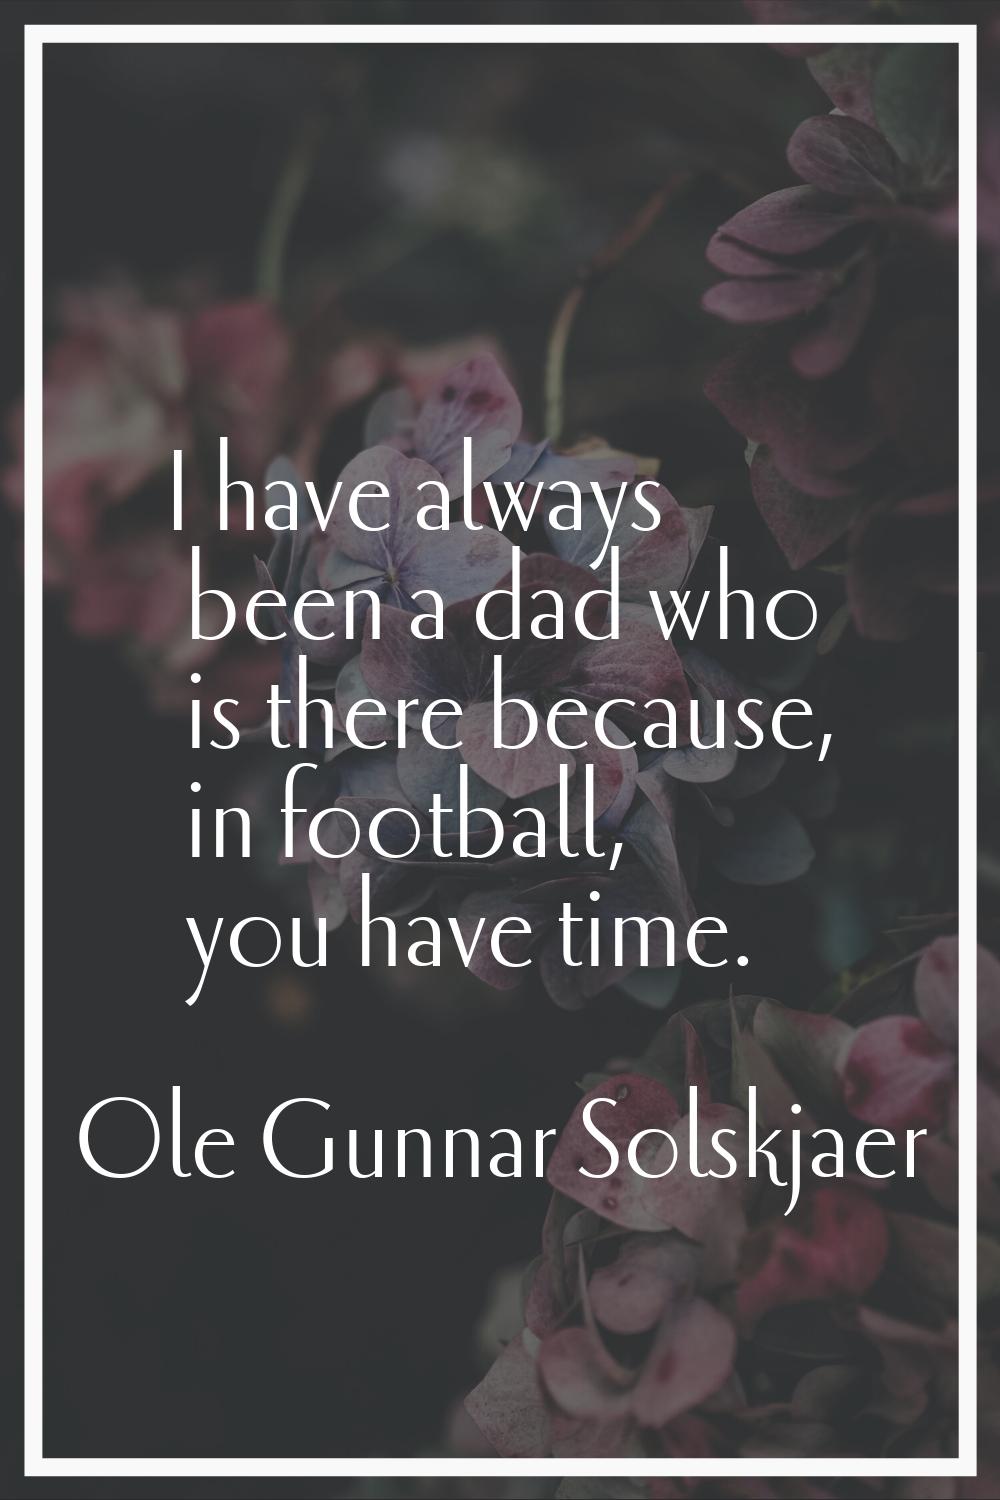 I have always been a dad who is there because, in football, you have time.